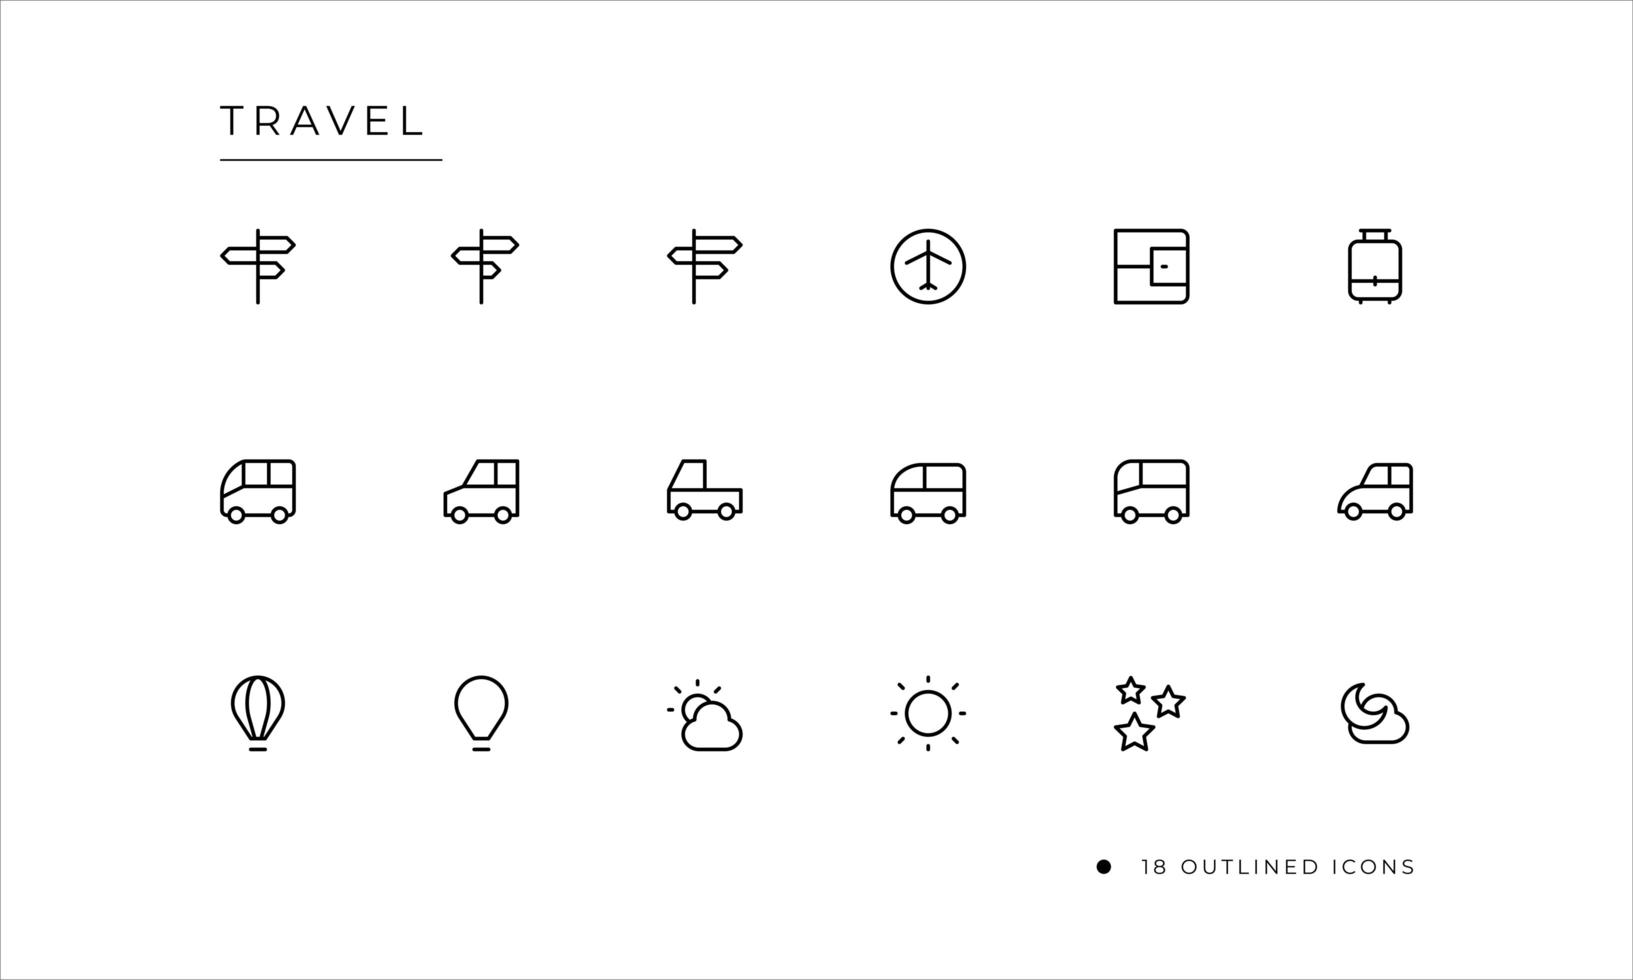 Travel icon set with outlined style vector